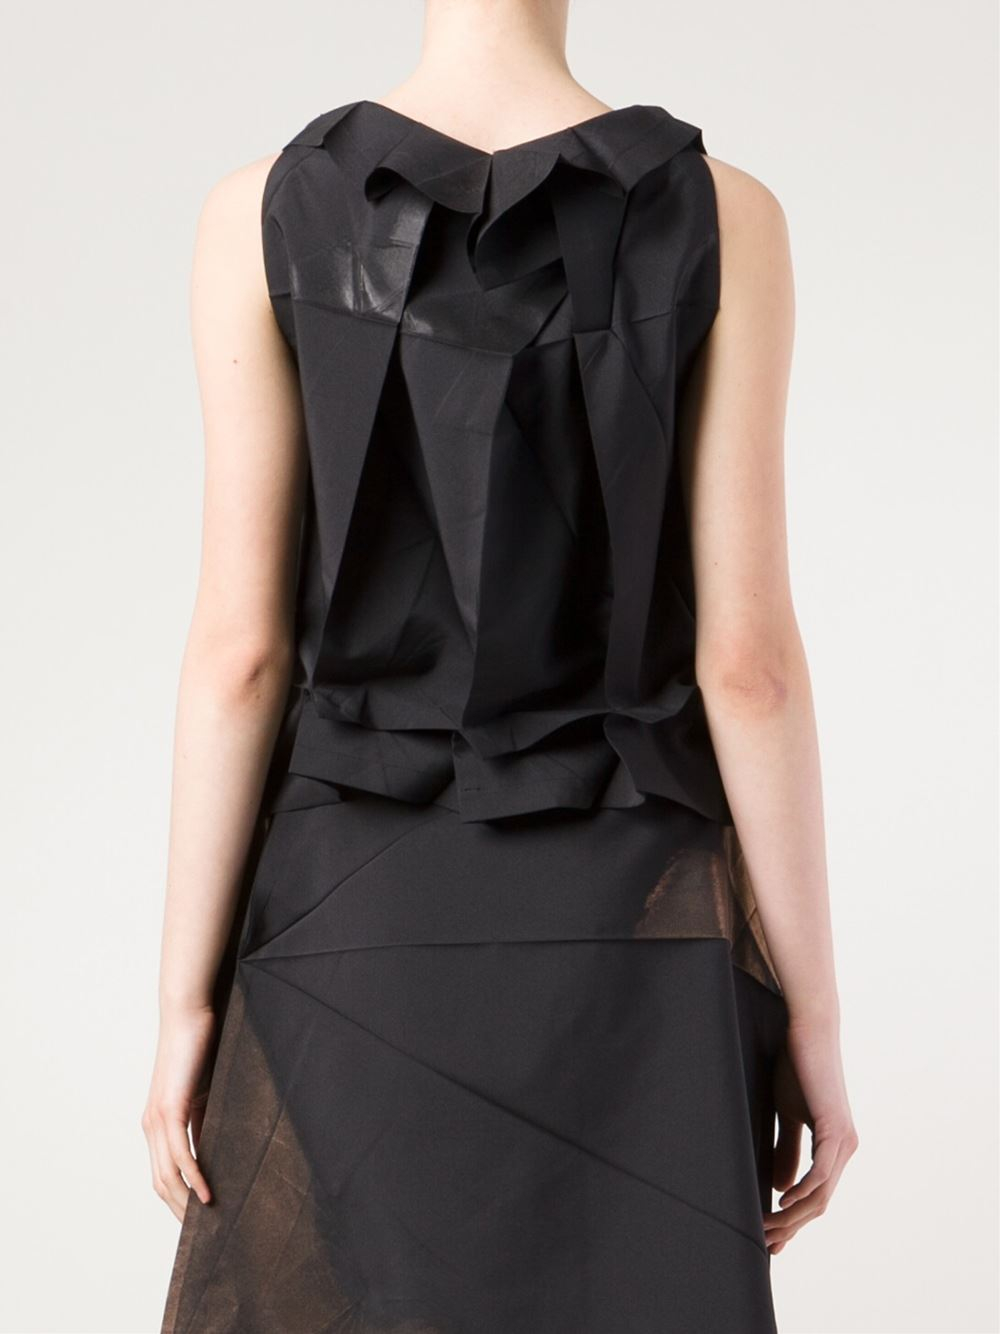 Lyst - 132 5. Issey Miyake Origami Style Sleeveless Top in Black